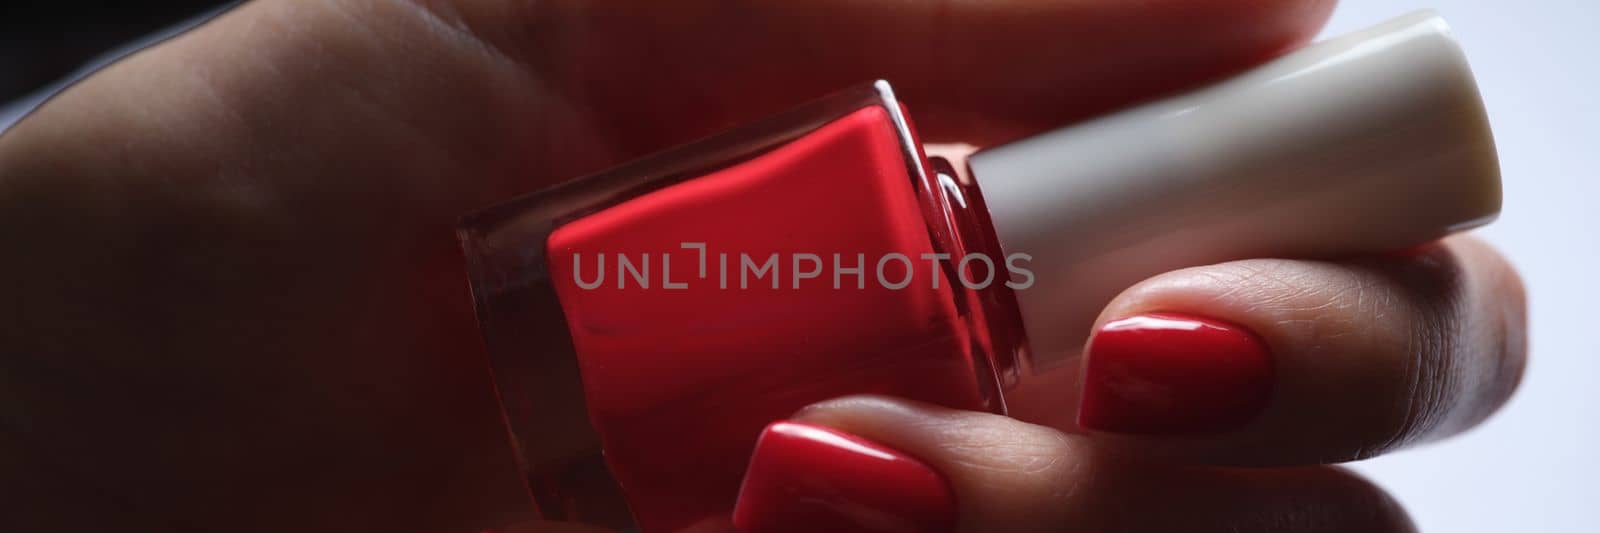 Hands with red manicure and bottle of nail polish by kuprevich